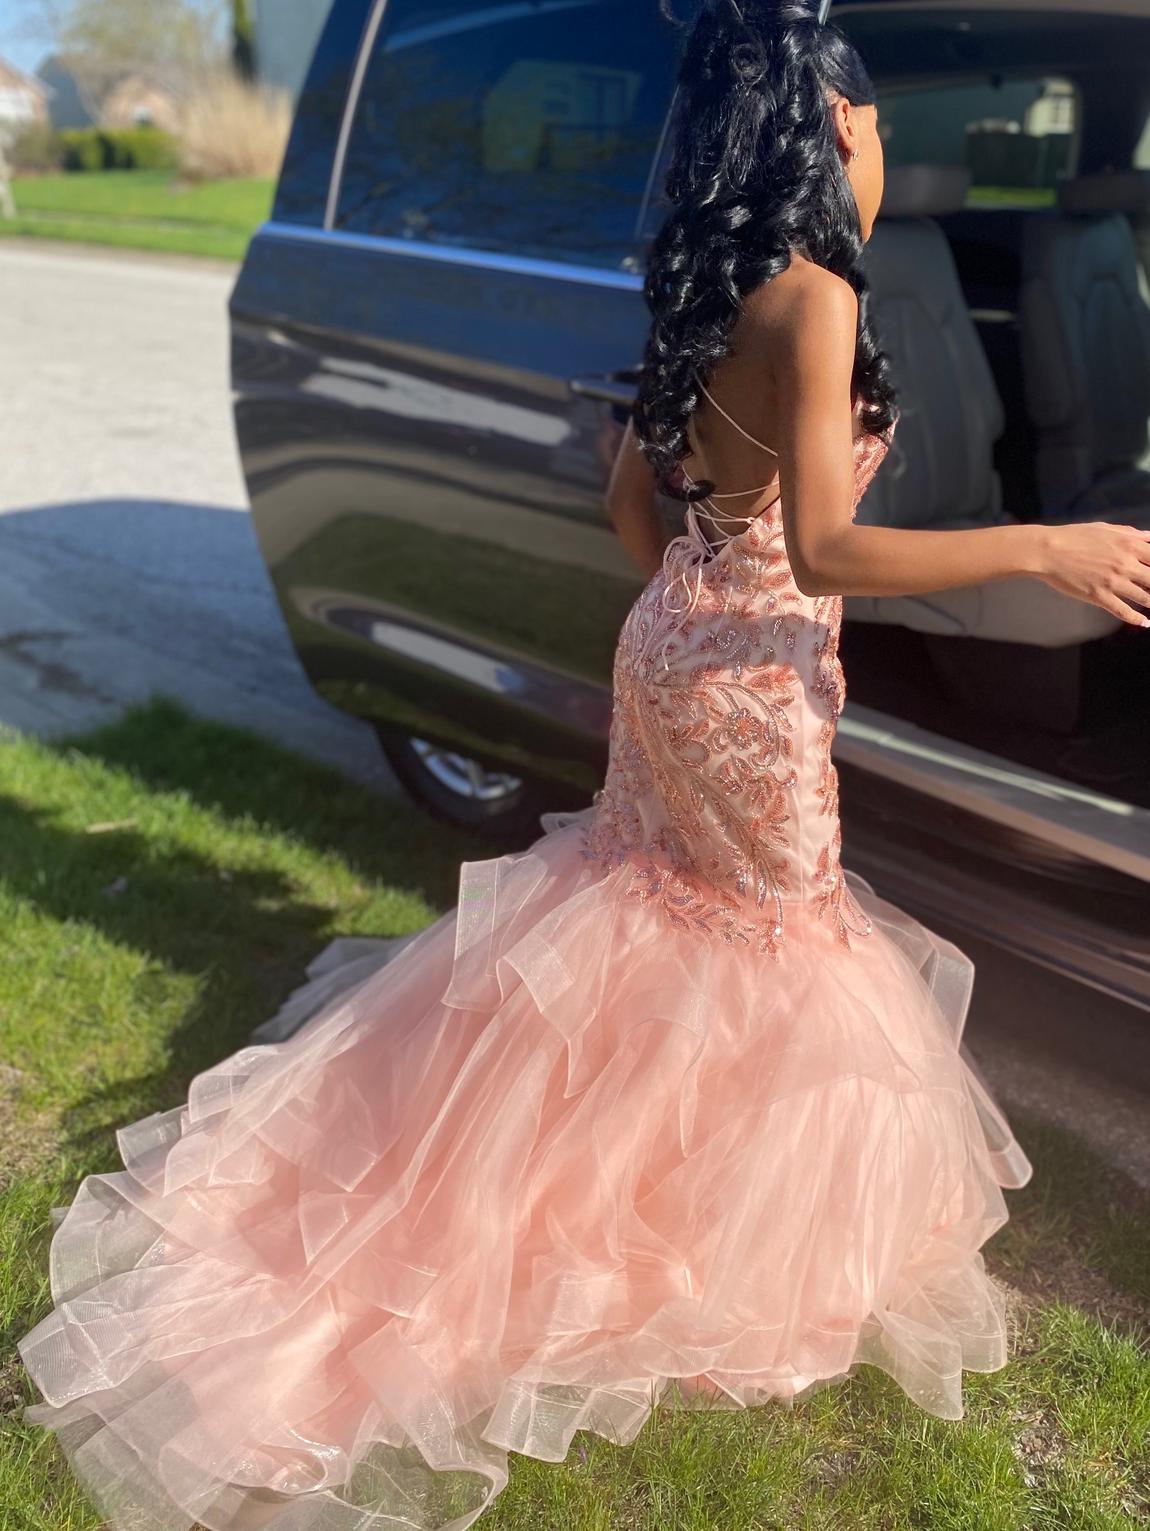 Plus-Size Black Prom and Homecoming Dresses - PromGirl